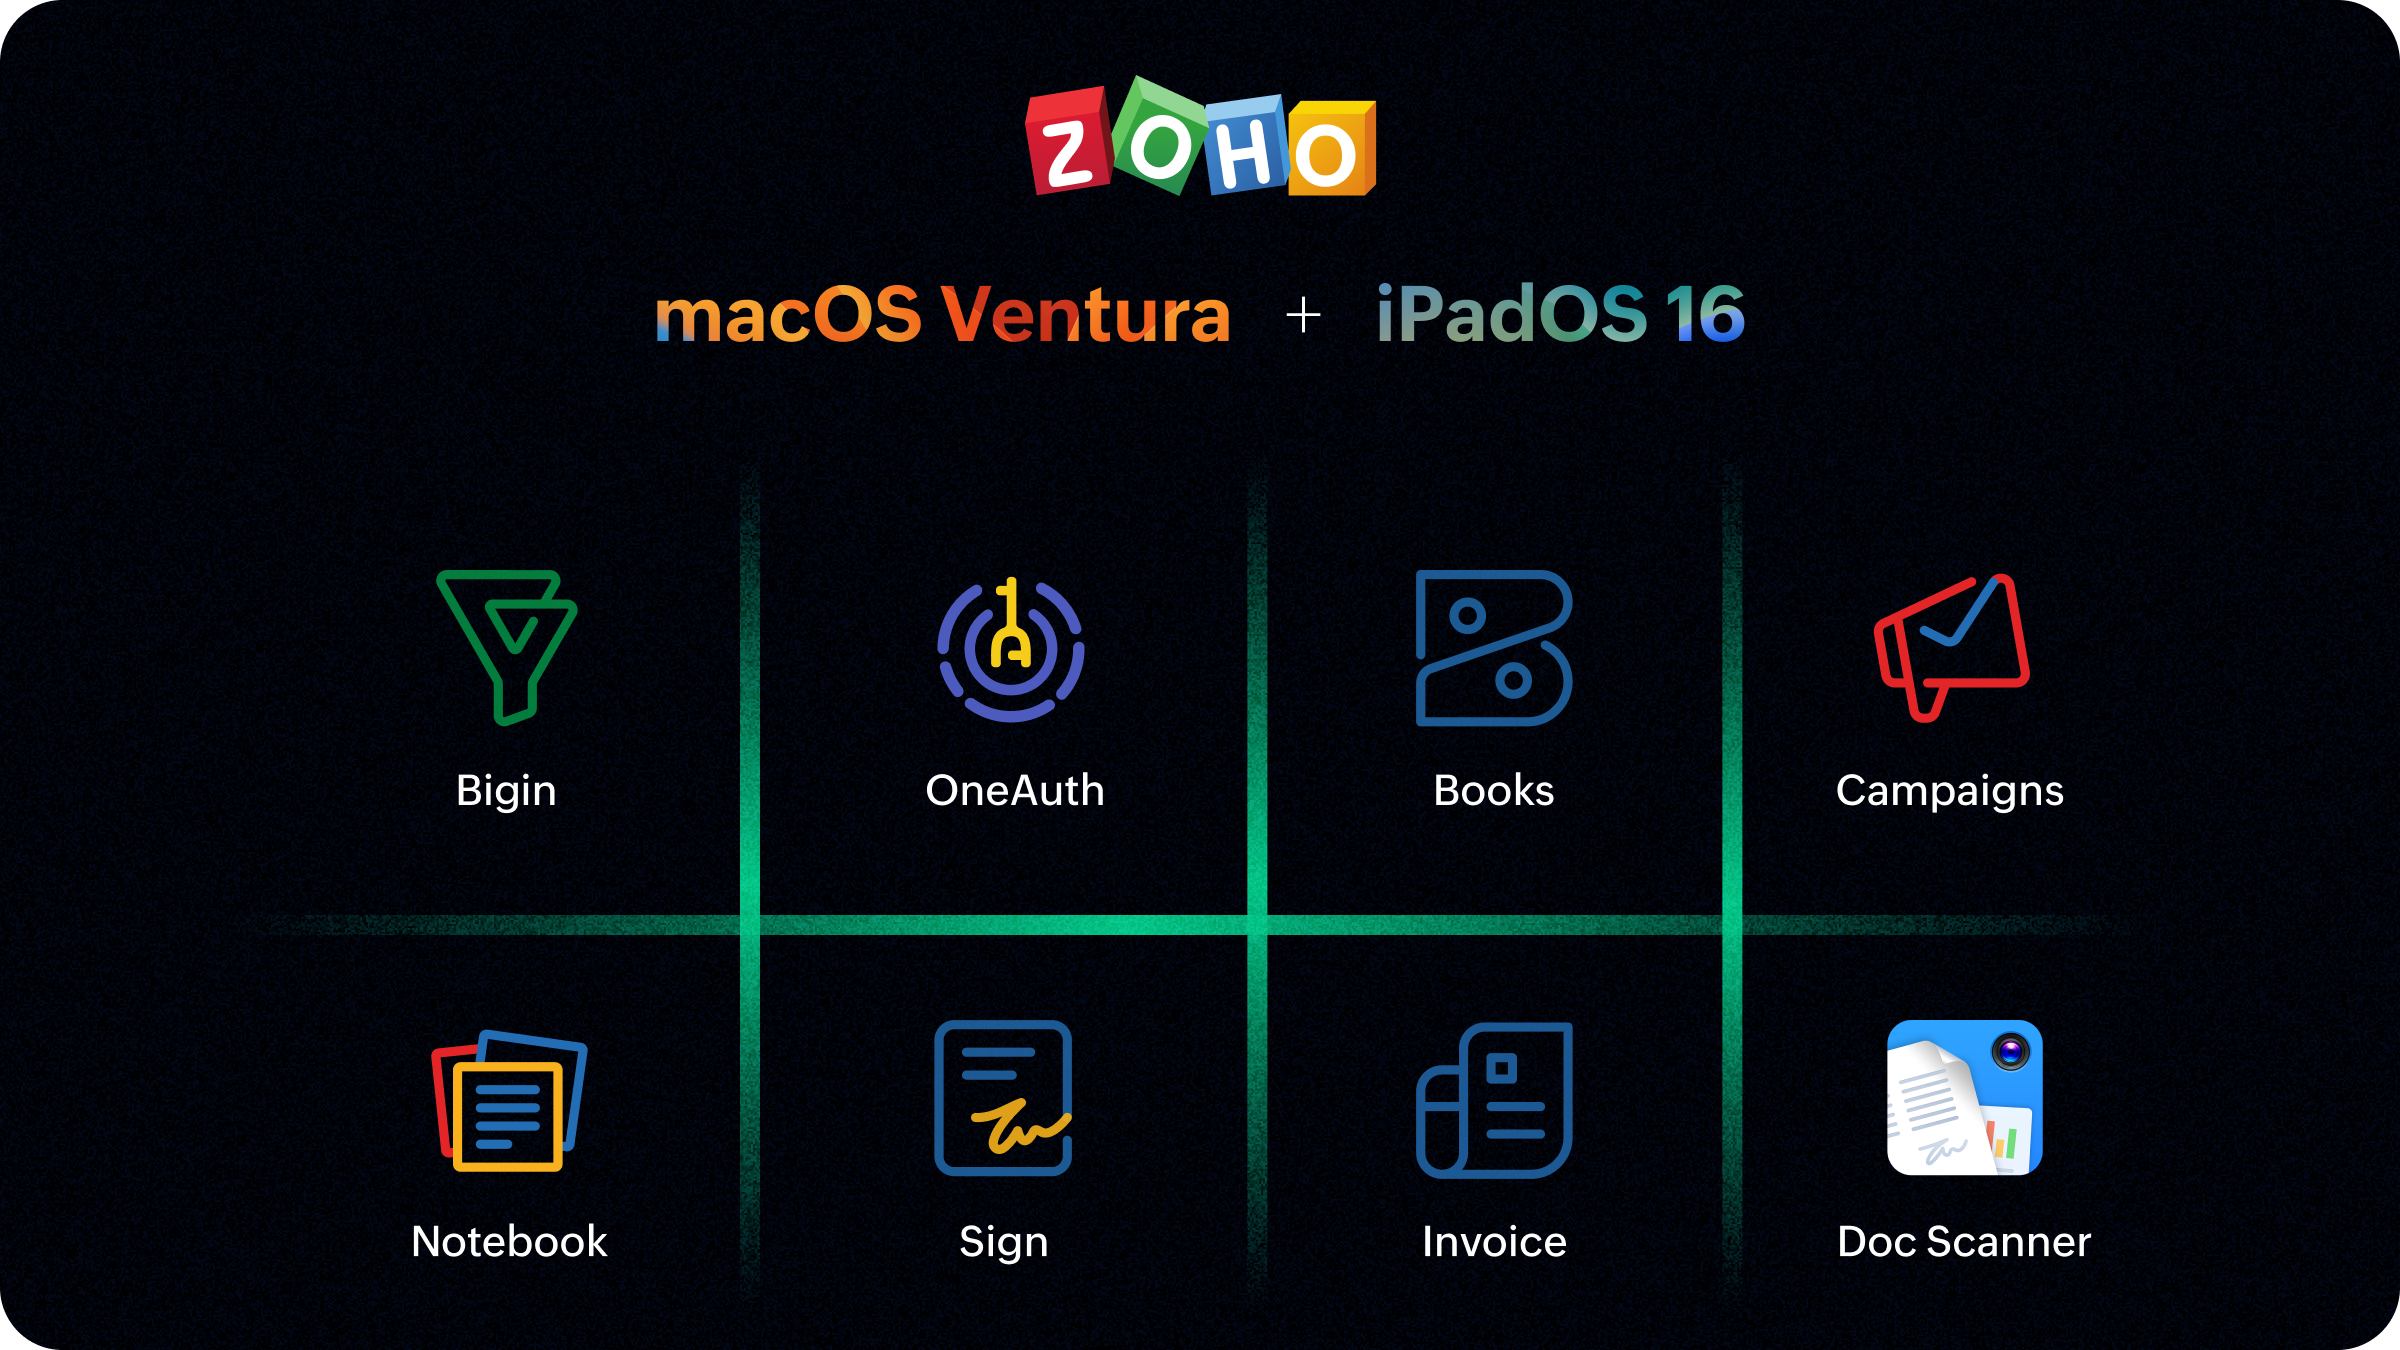 Zoho raises the bar for business apps on iPadOS 16 and macOS Ventura